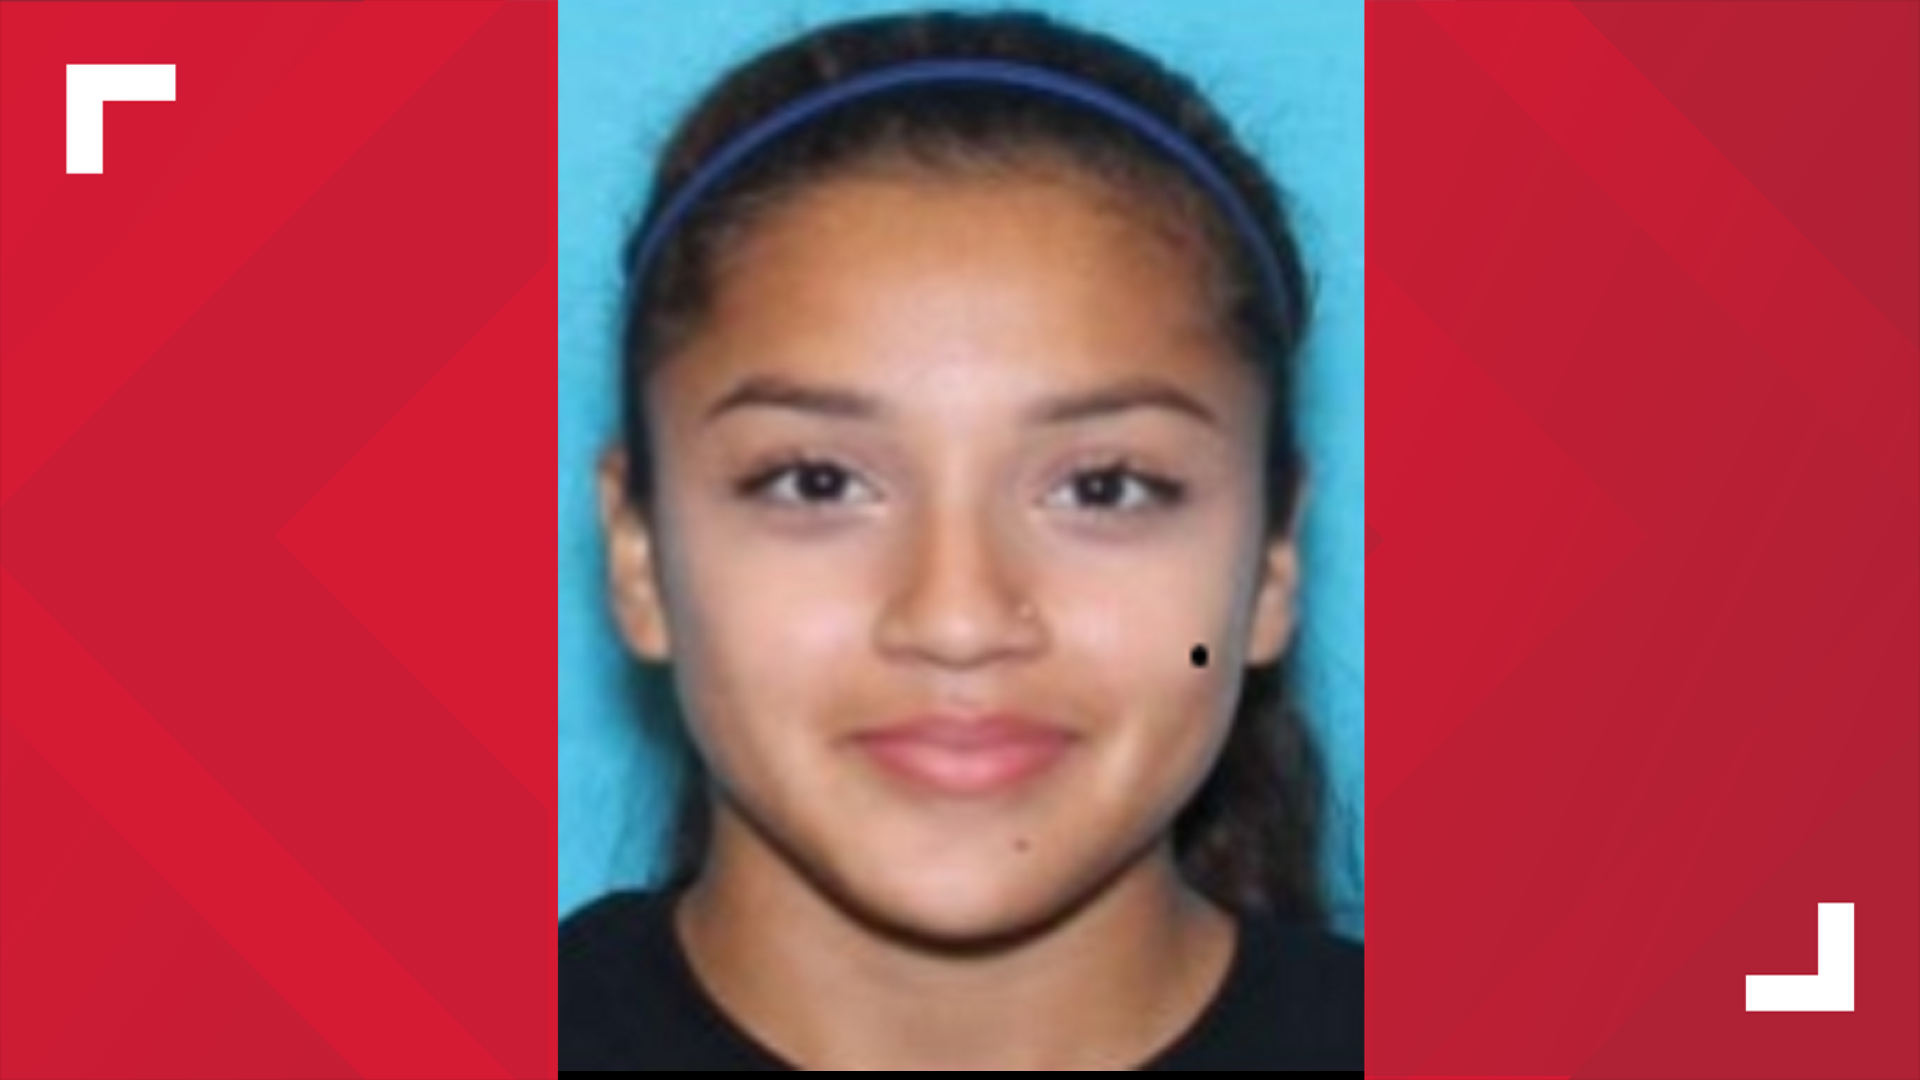 PFC Vanessa Guillen was last seen Wednesday. Fort Hood Military Police and Army CID are asking for the public's help to find her.